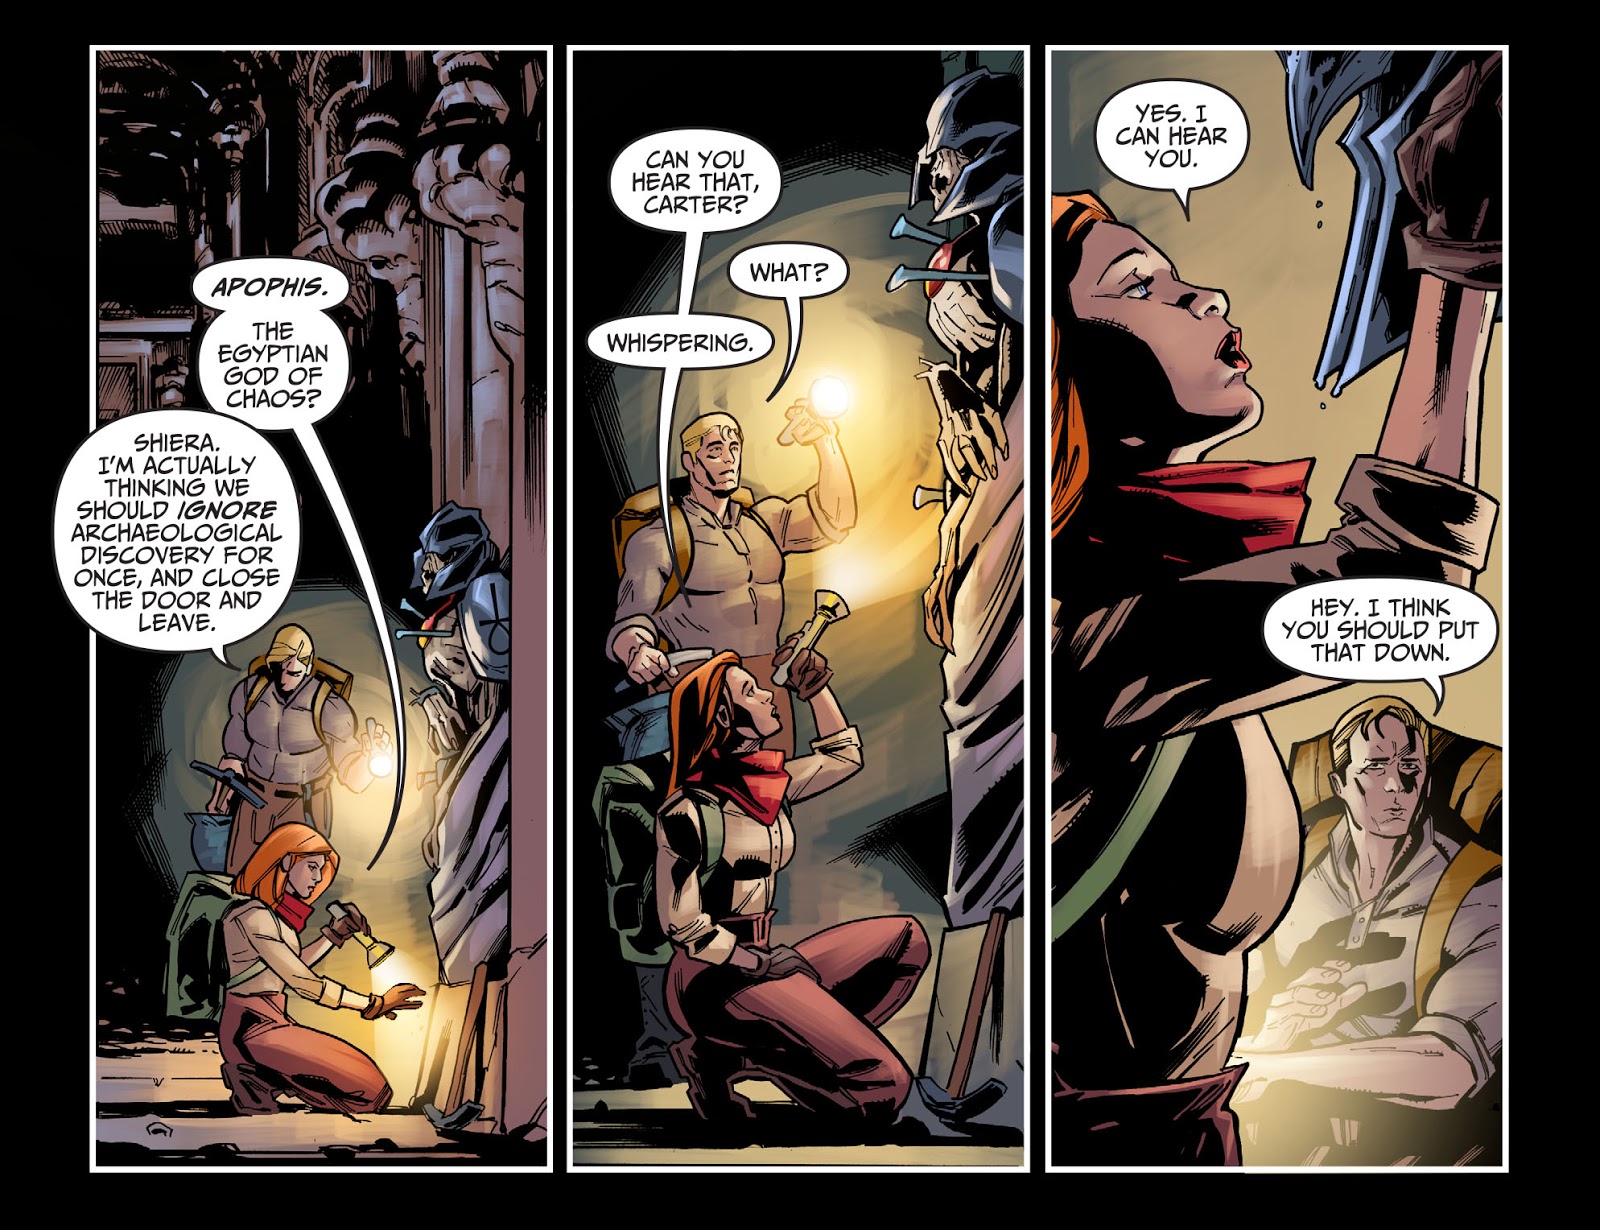 Hawkgirl Possessed By Adophis (Injustice Gods Among Us) 